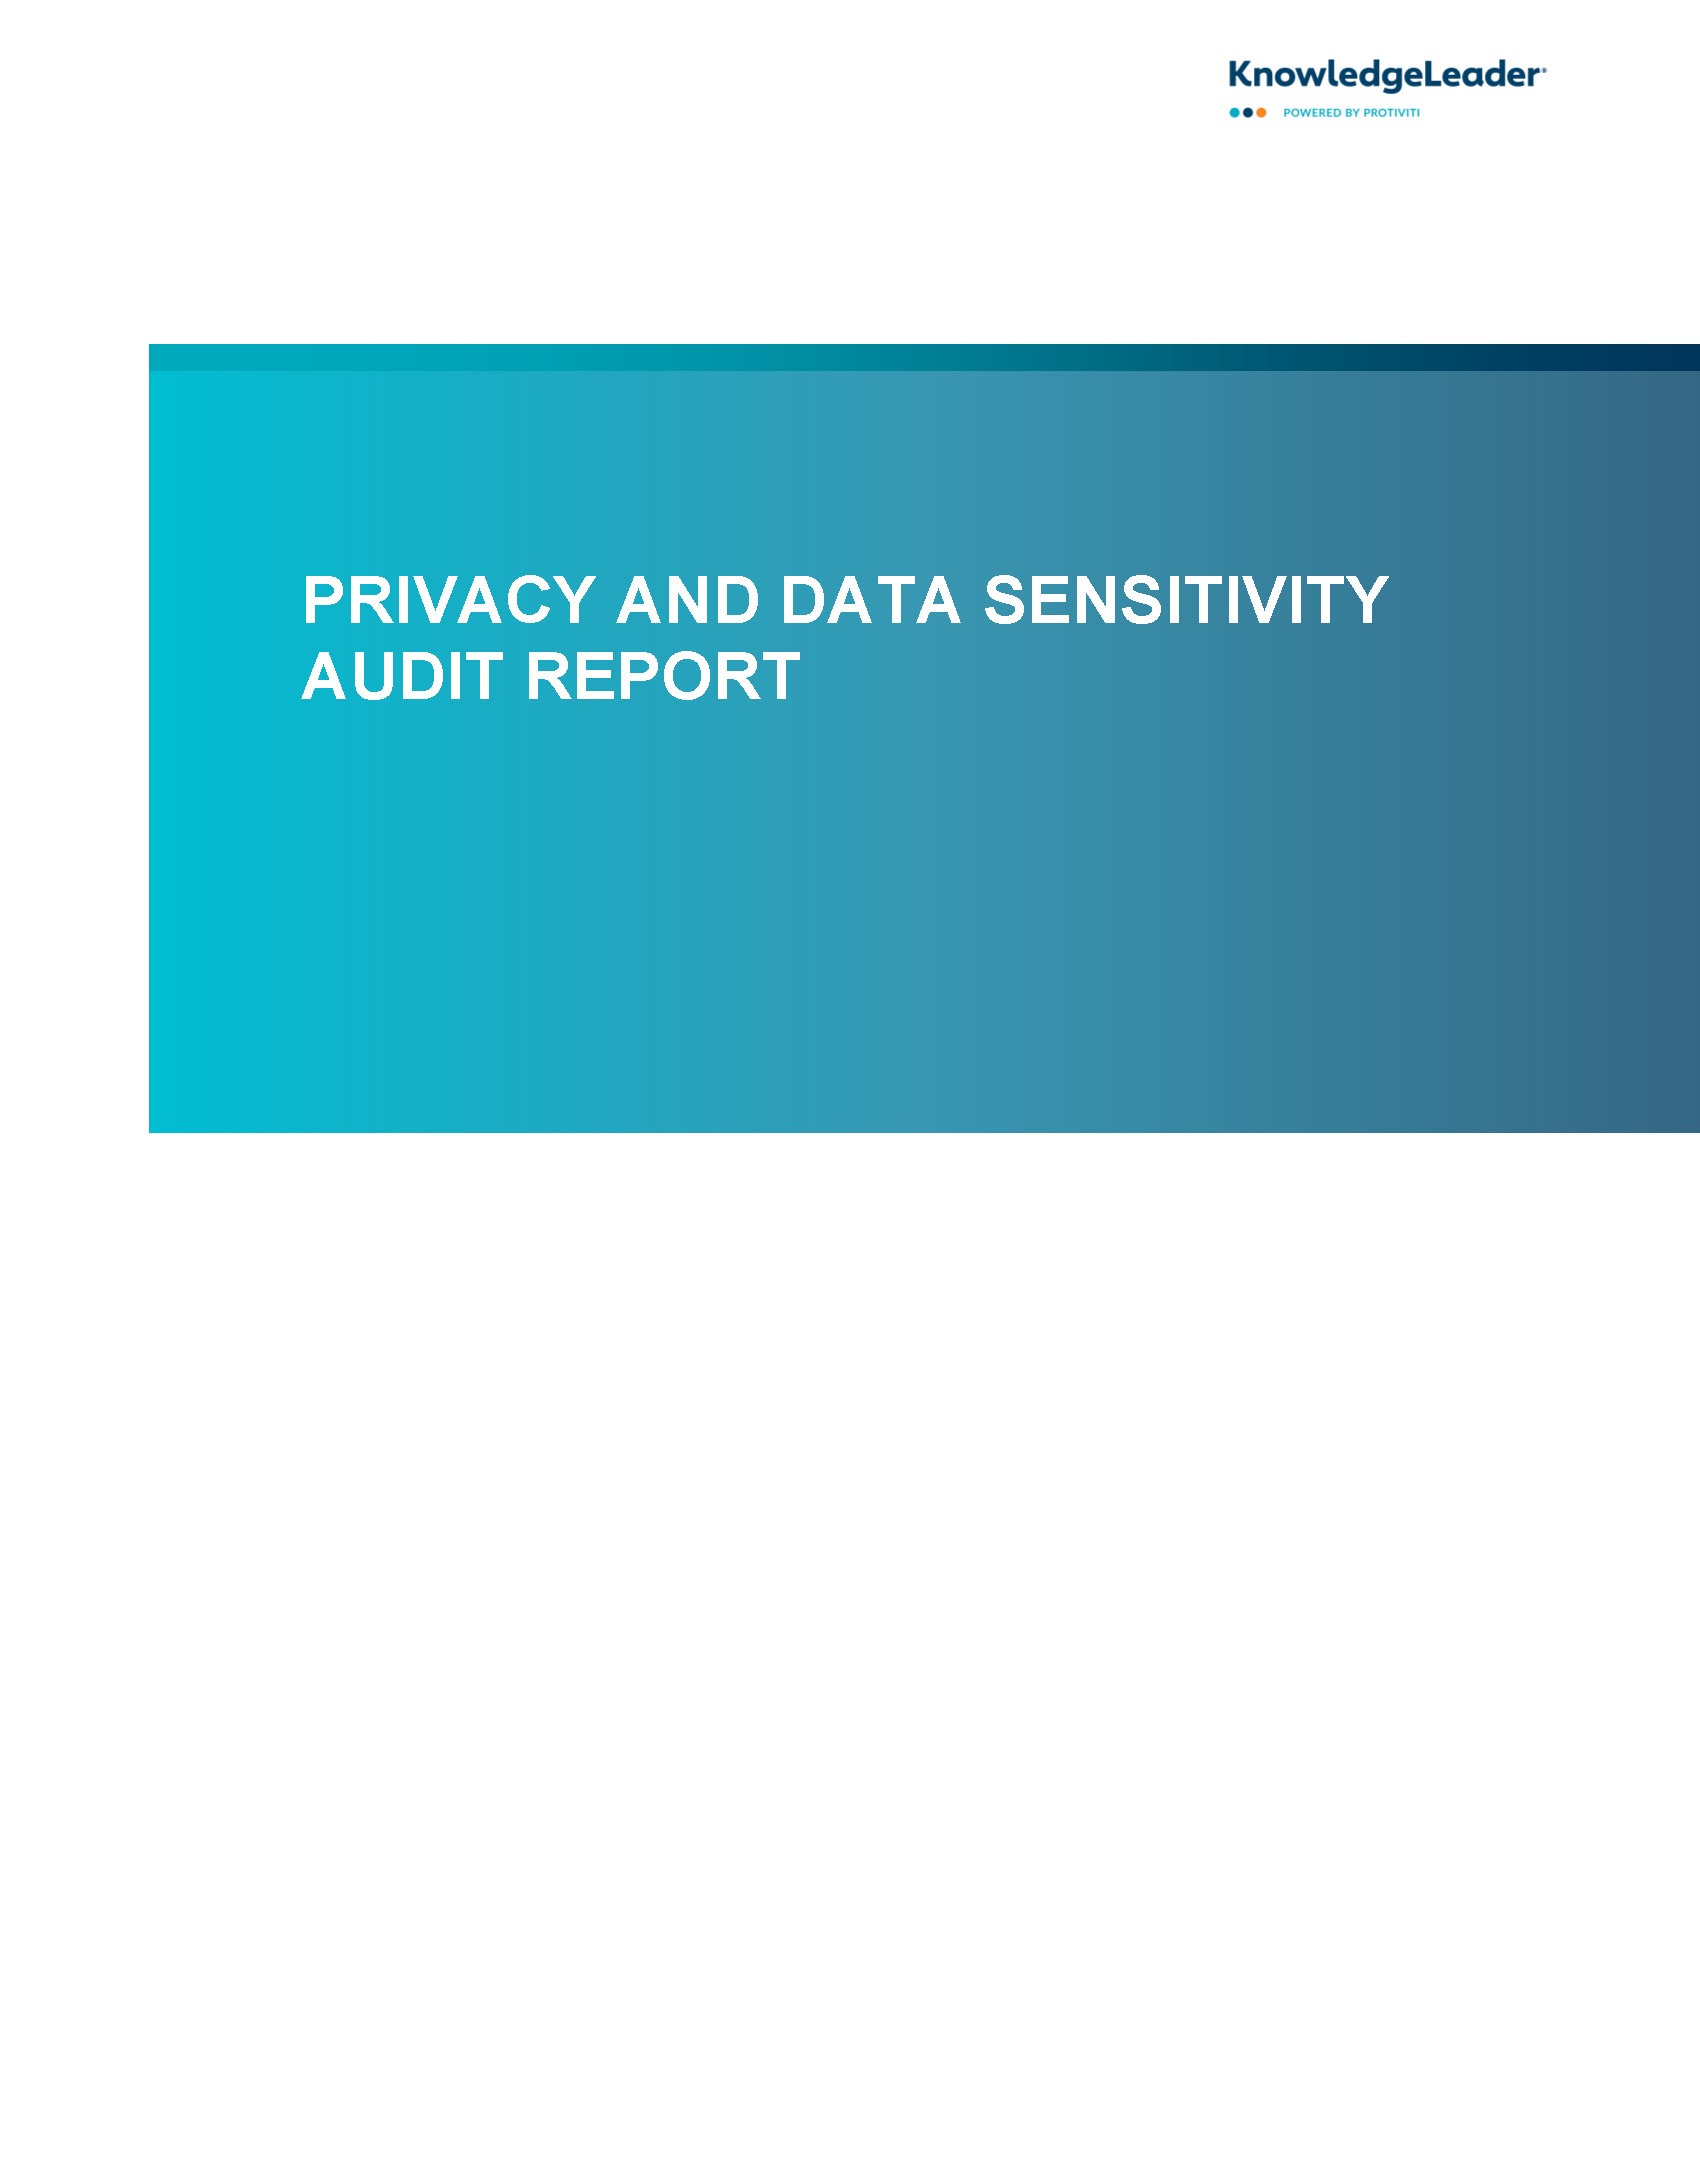 Screenshot of the first page of Privacy and Data Sensitivity Audit Report